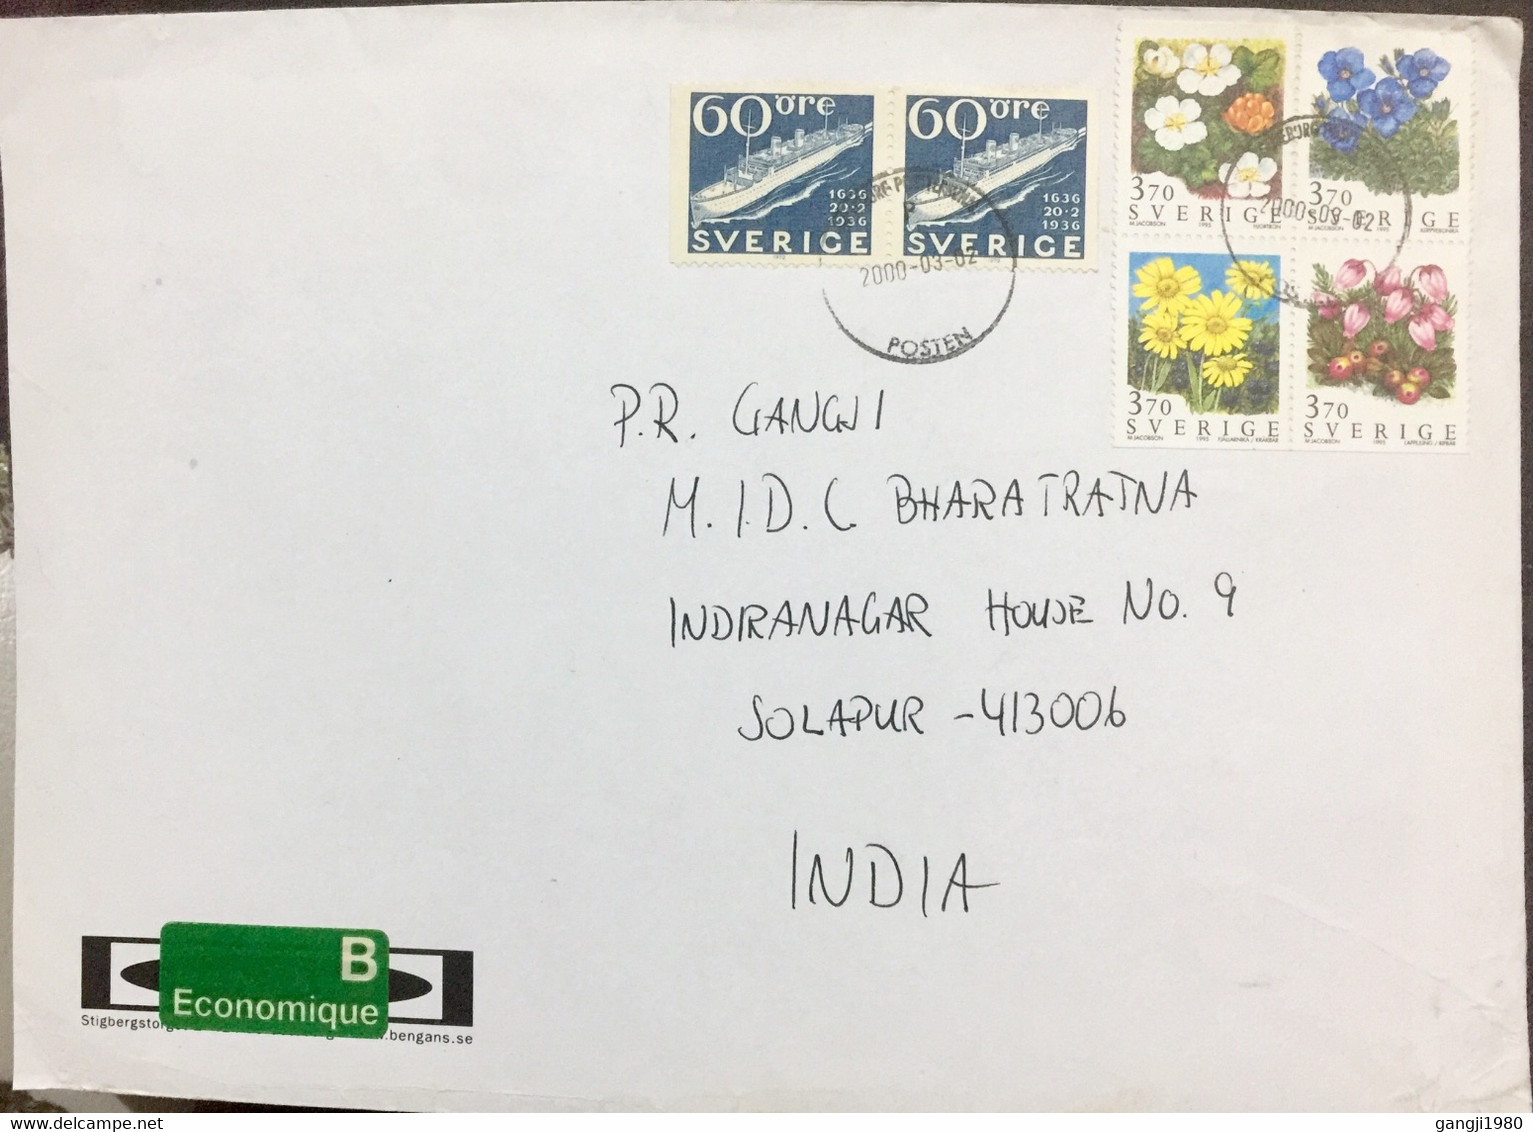 SWEDEN 2000, COVER VIGNETTE ECONOMIQUE GREEN LABEL USED TO INDIA,STAMPS 4 STAMPS FLOWERS BLOCK,SHIP PAIR - Storia Postale